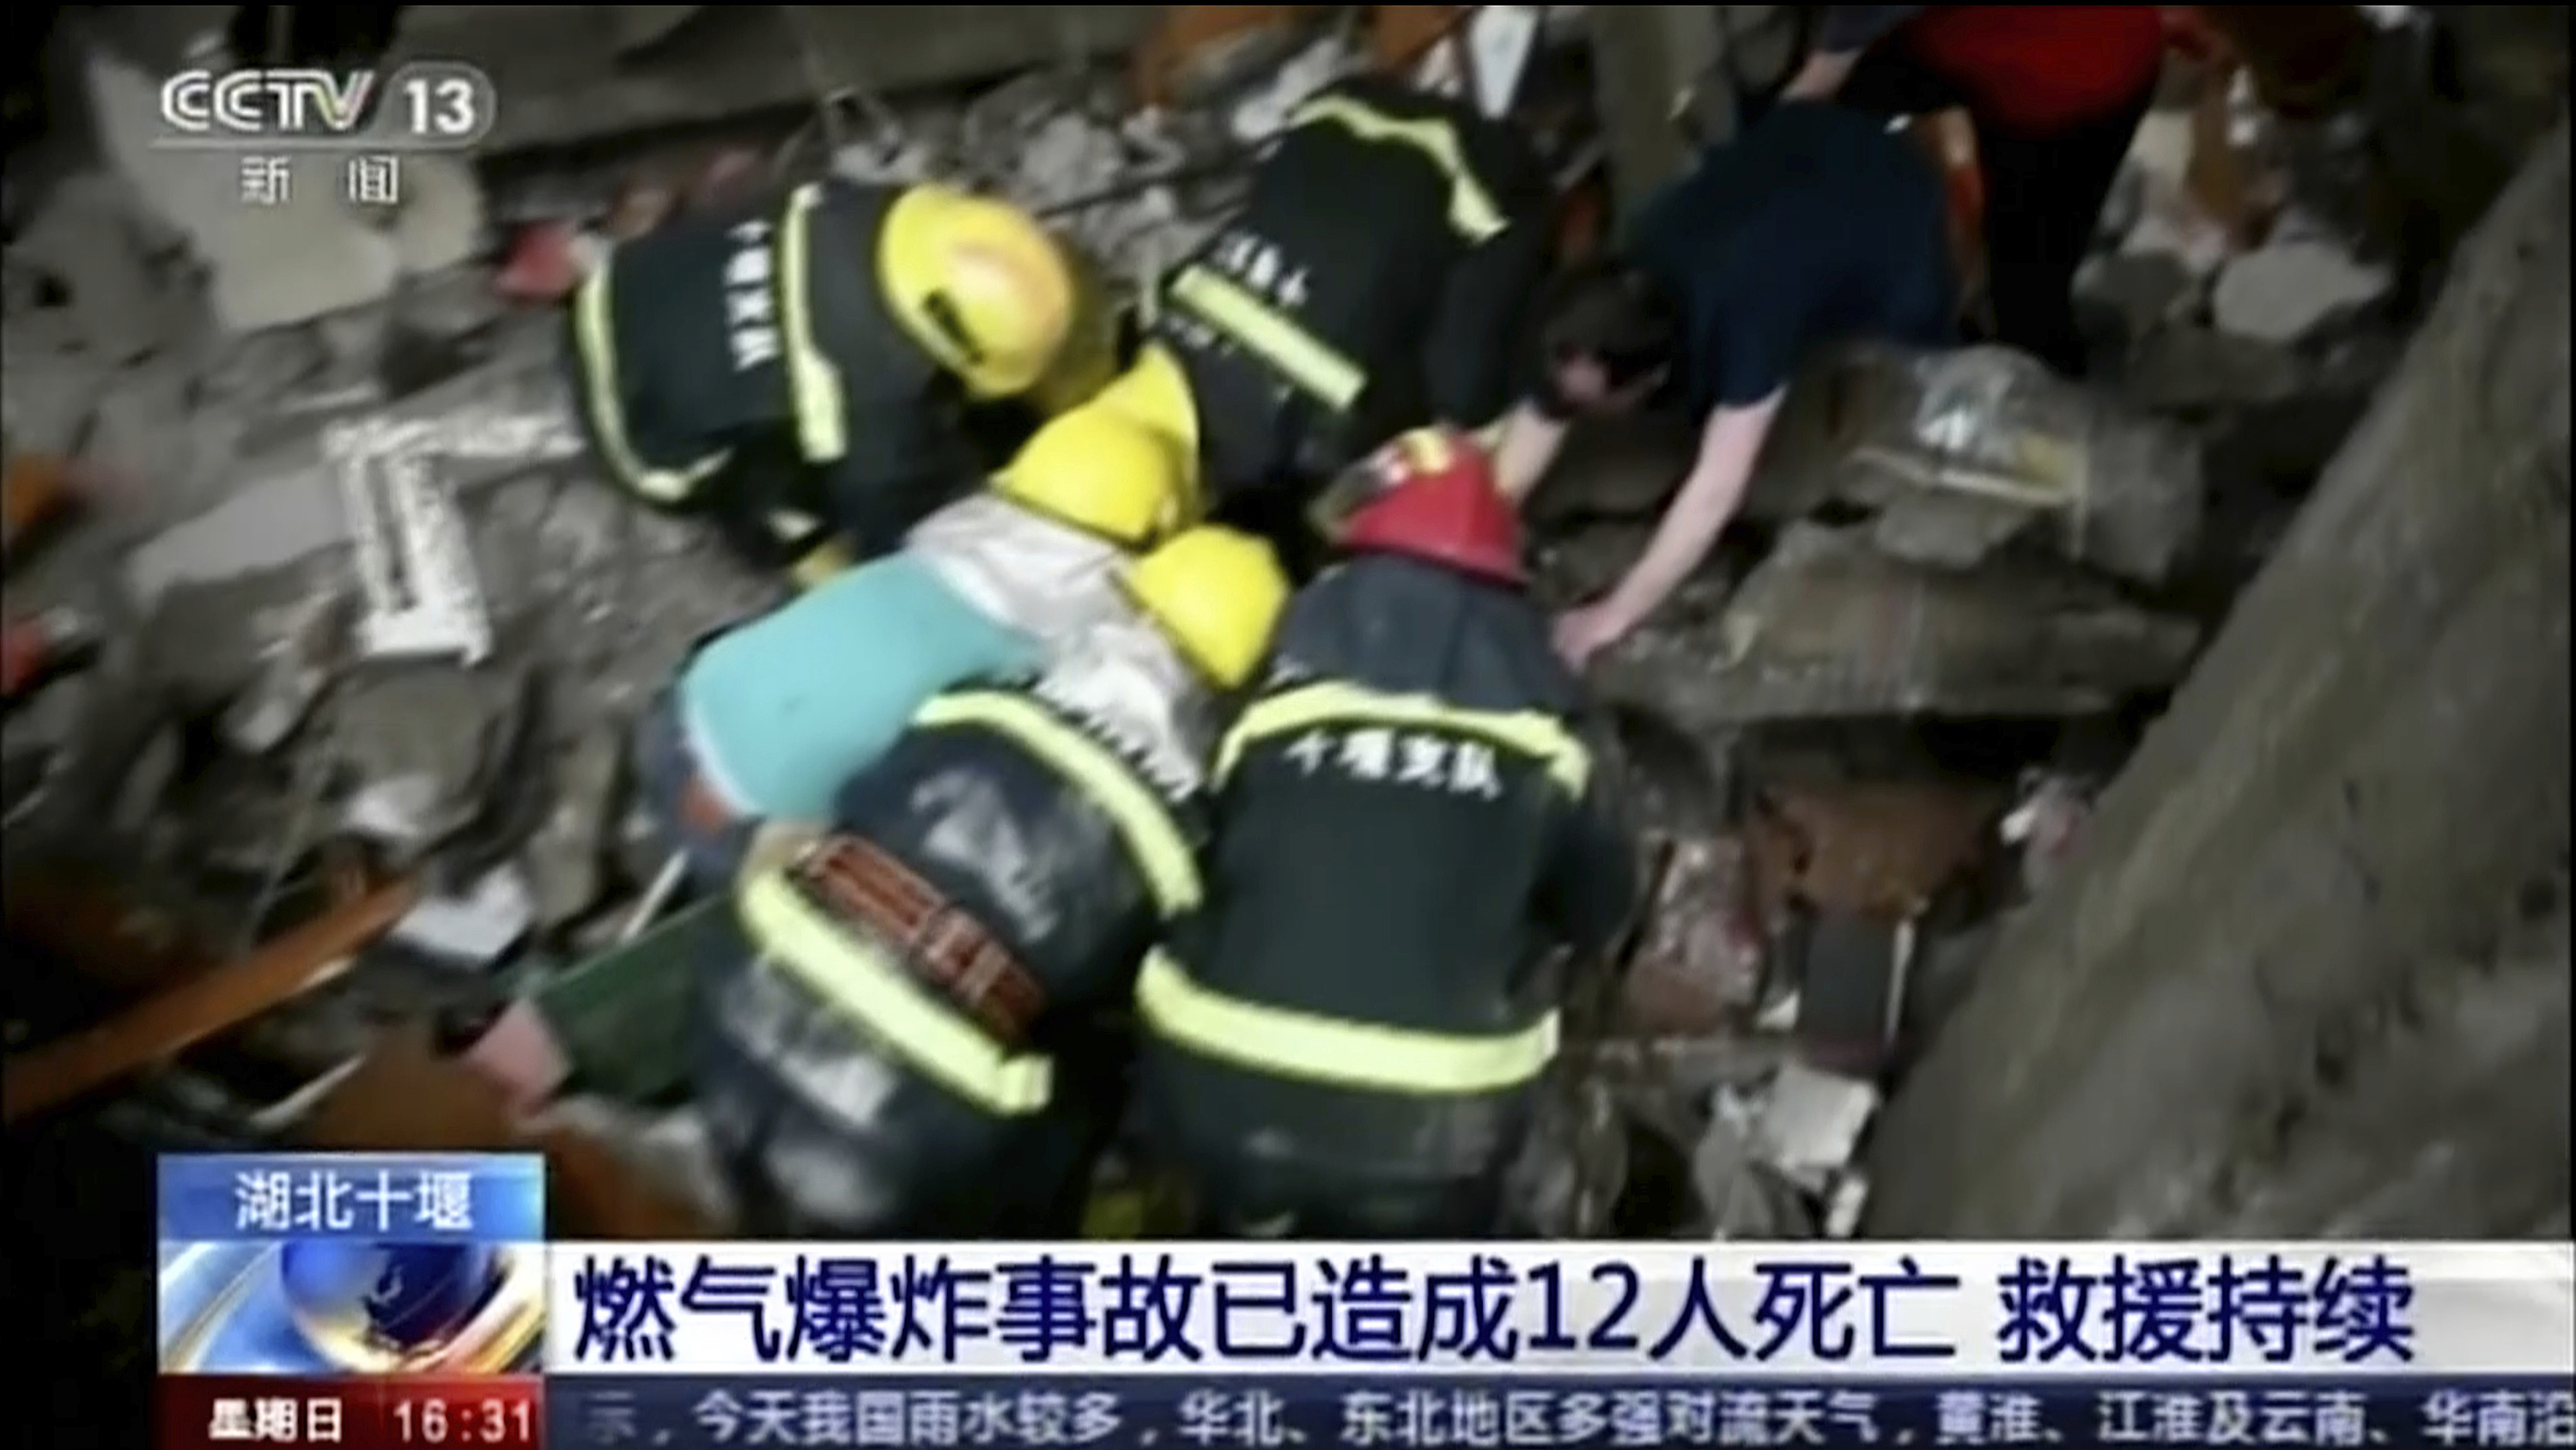 Rescue workers at the scene after an explosion in Shiyan city